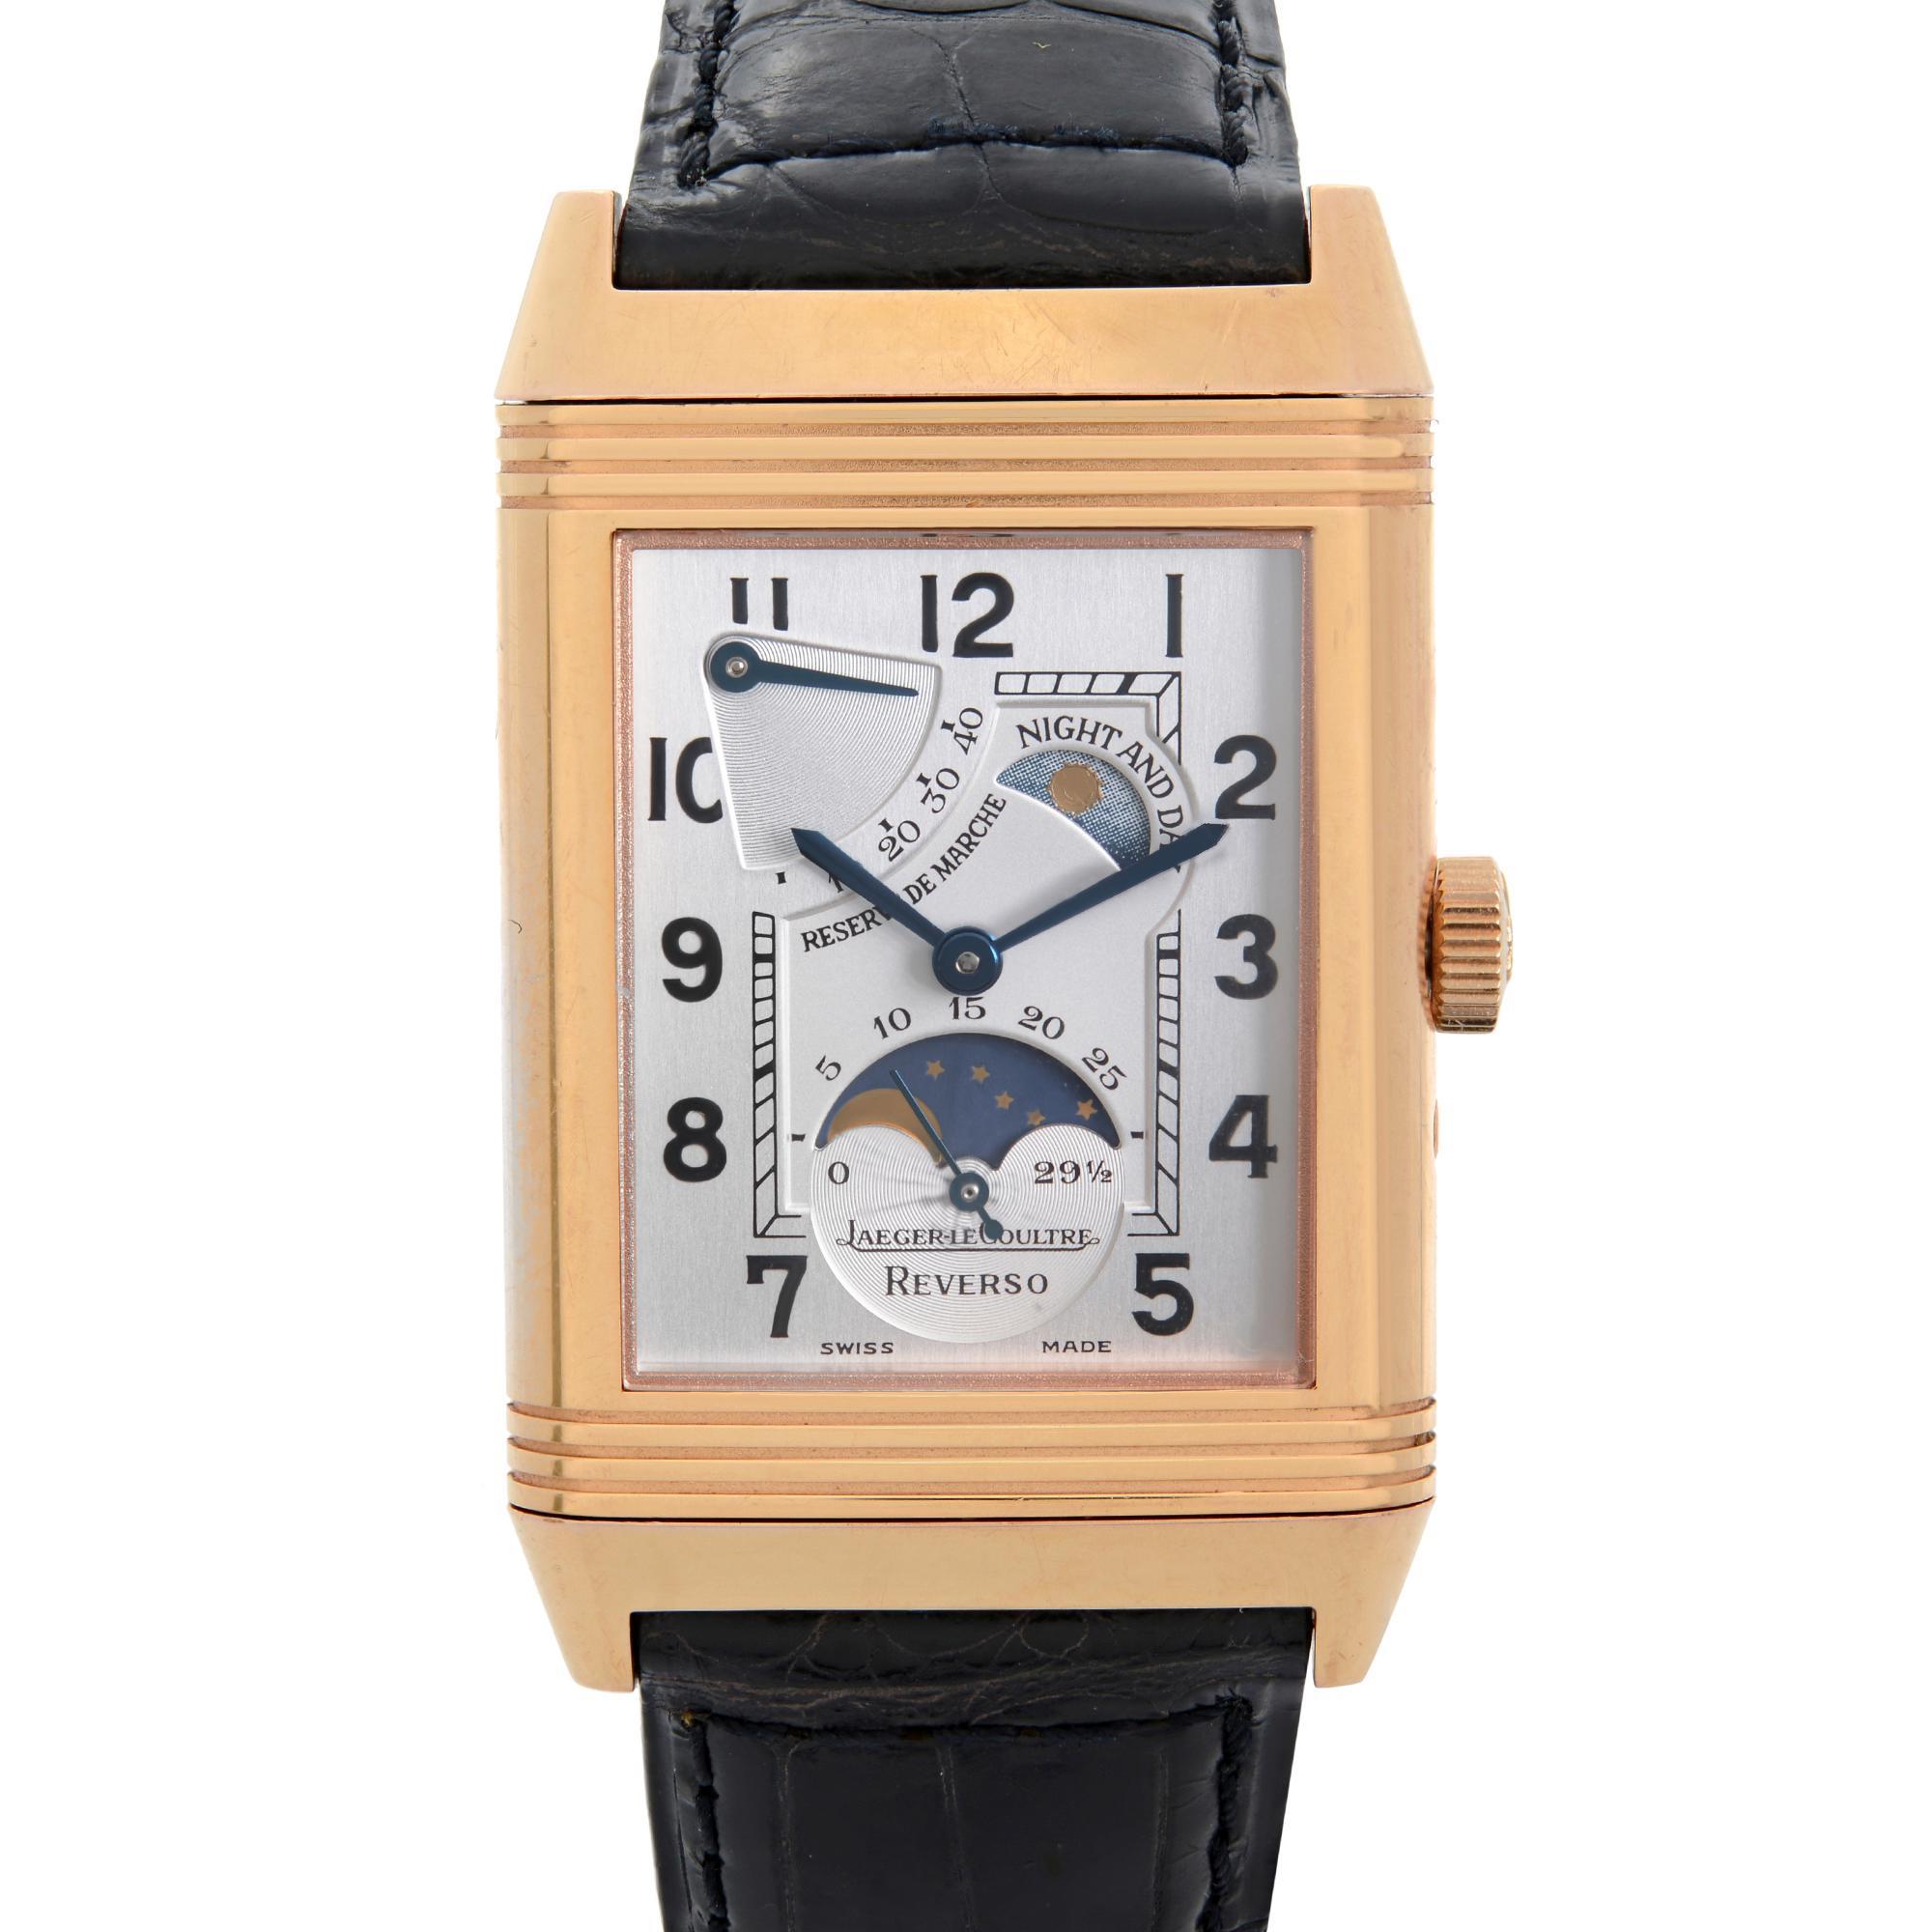 Pre-owned Jaeger-LeCoultre Reverso Sun Moon 18k Rose Gold Silver Dial Manual Wind Men's Watch 270.2.63. Comes with Original Box and Manual. The Leather Strap has Signs of Wear. This Timepiece is Powered by a Mechanical Movement and Features: 18kt